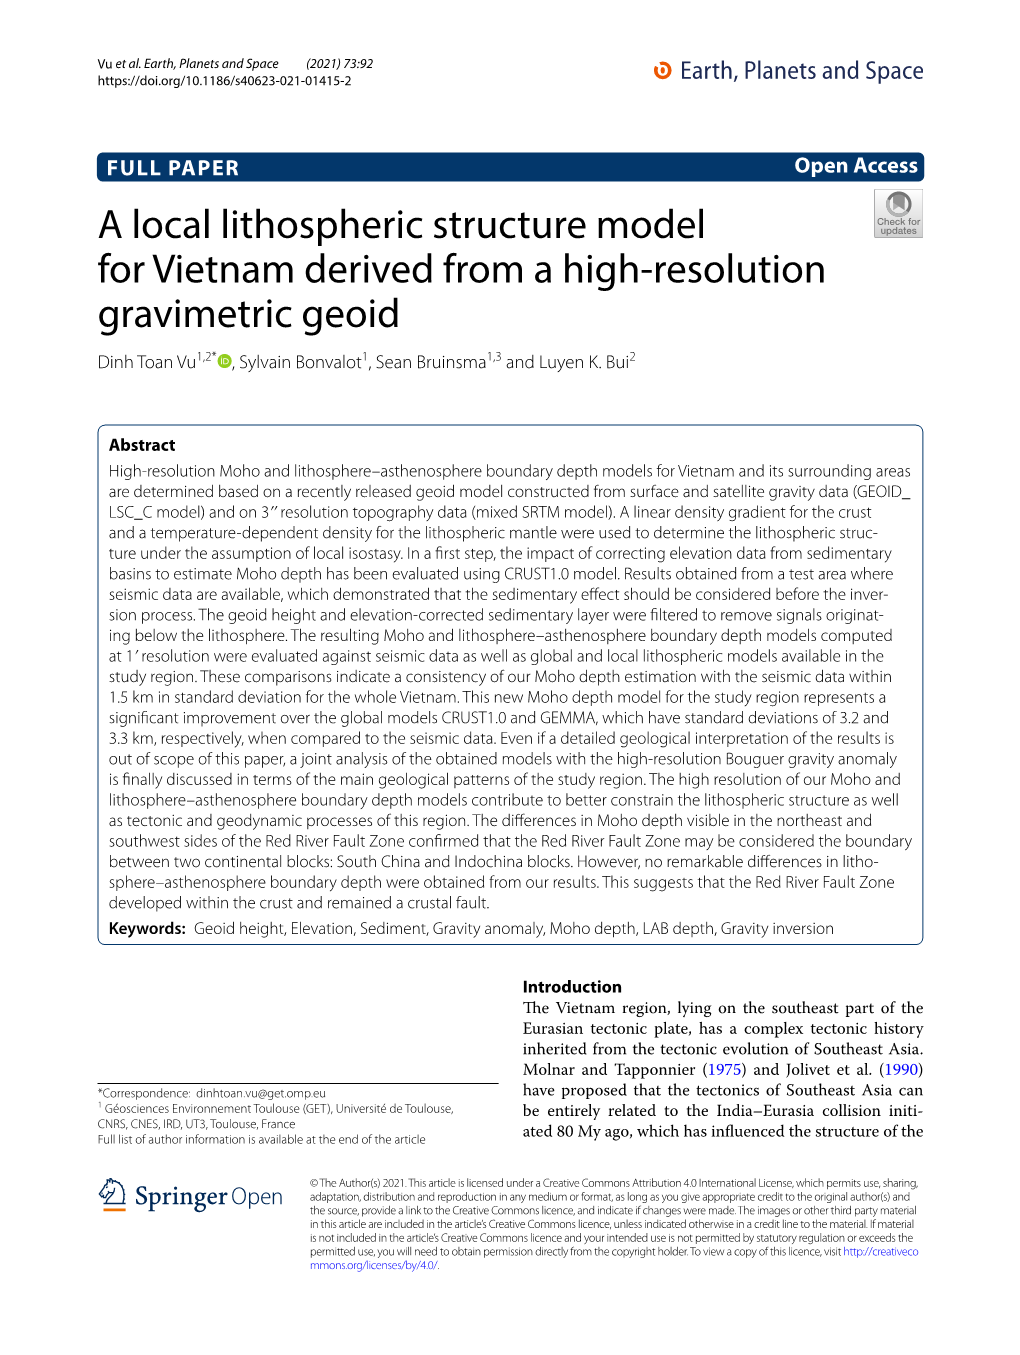 A Local Lithospheric Structure Model for Vietnam Derived from a High-Resolution Gravimetric Geoid